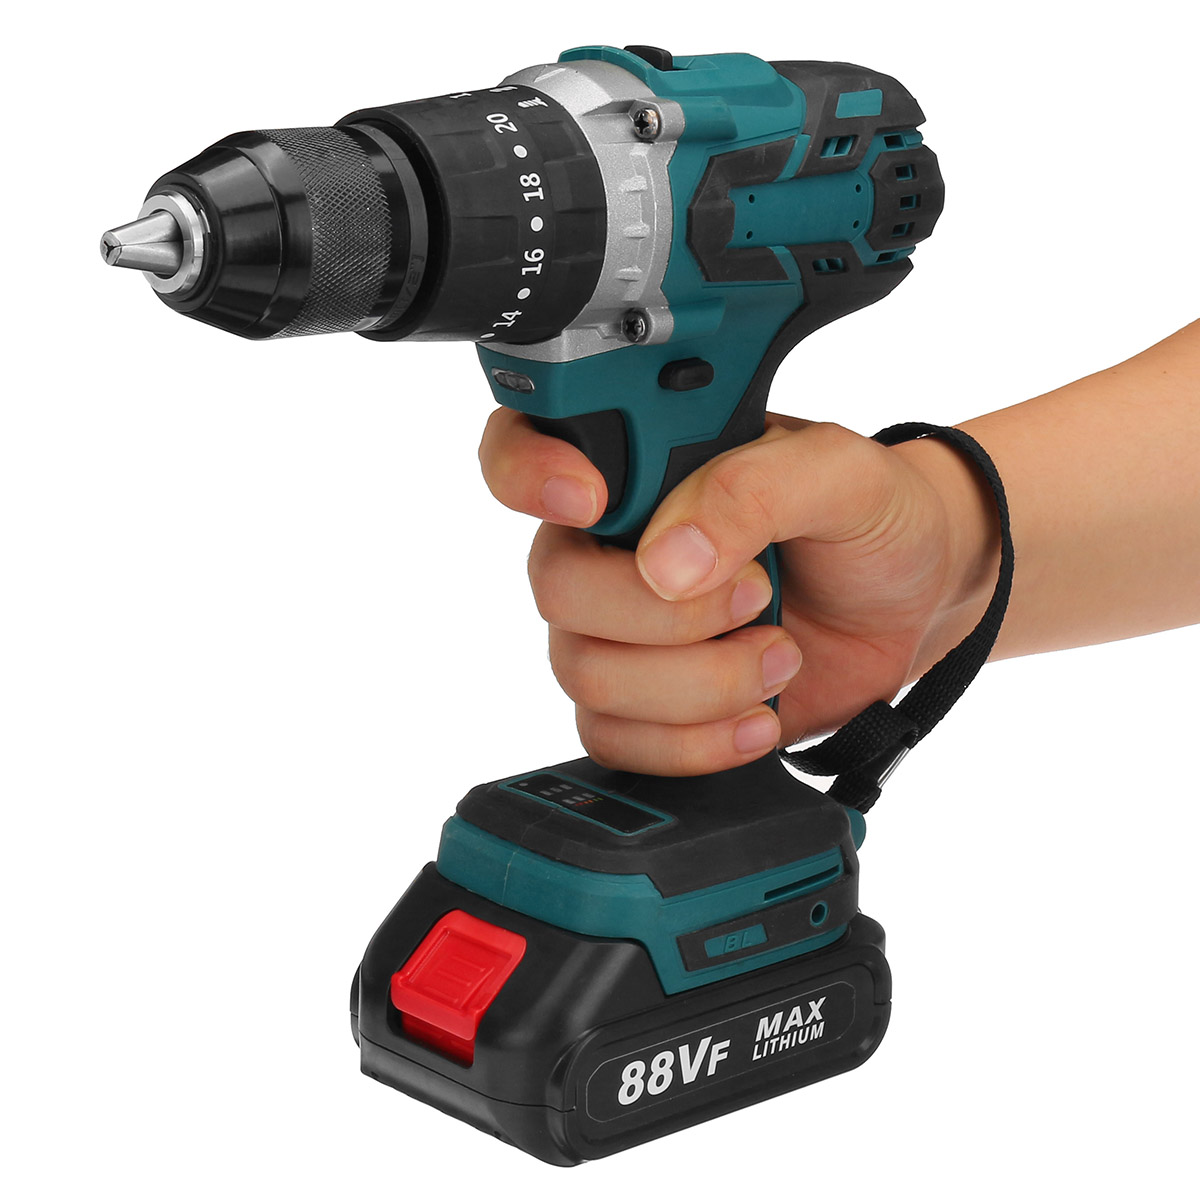 88VF-3-IN-1-Cordless-Brushless-Drill-Electric-Screwdriver-Hammer-Impact-Drill-203-Torque-W-12pcs-Bat-1854945-7